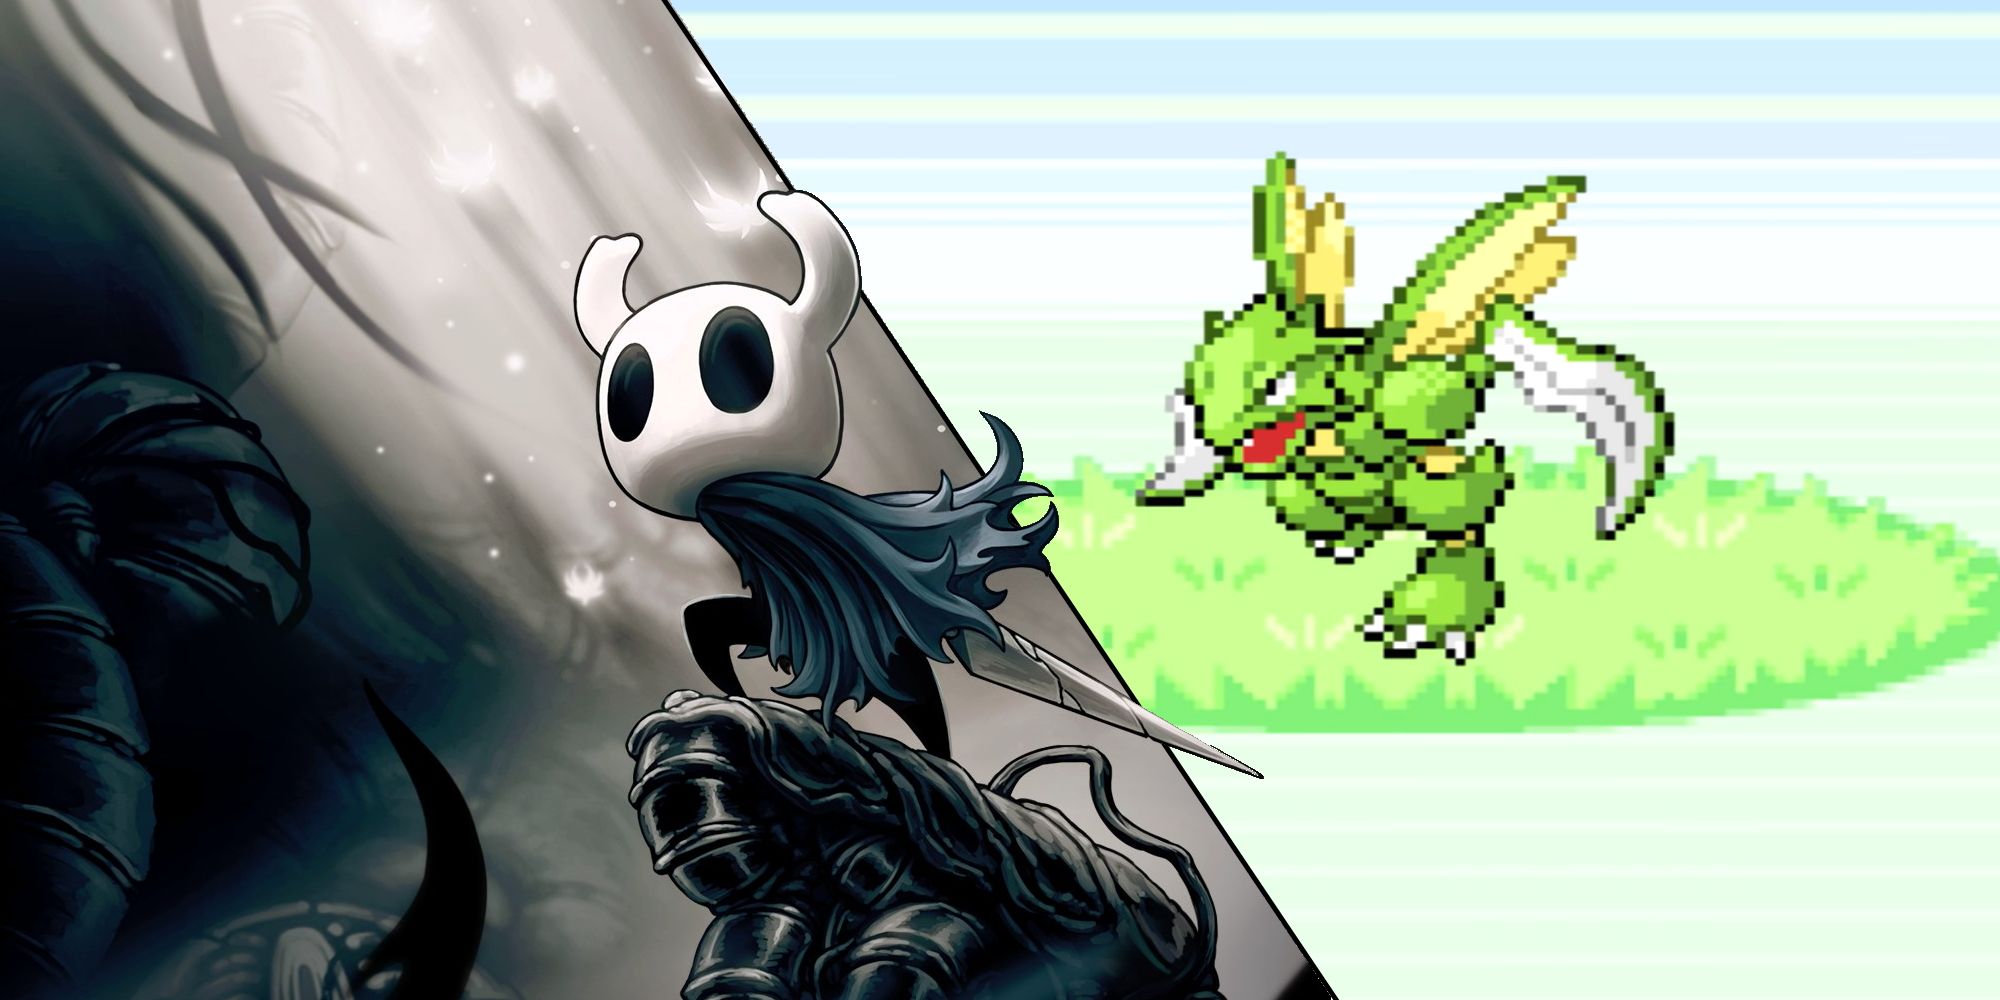 Best Insects In Games Featured Image (featuring the Hollow Knight and Scyther)